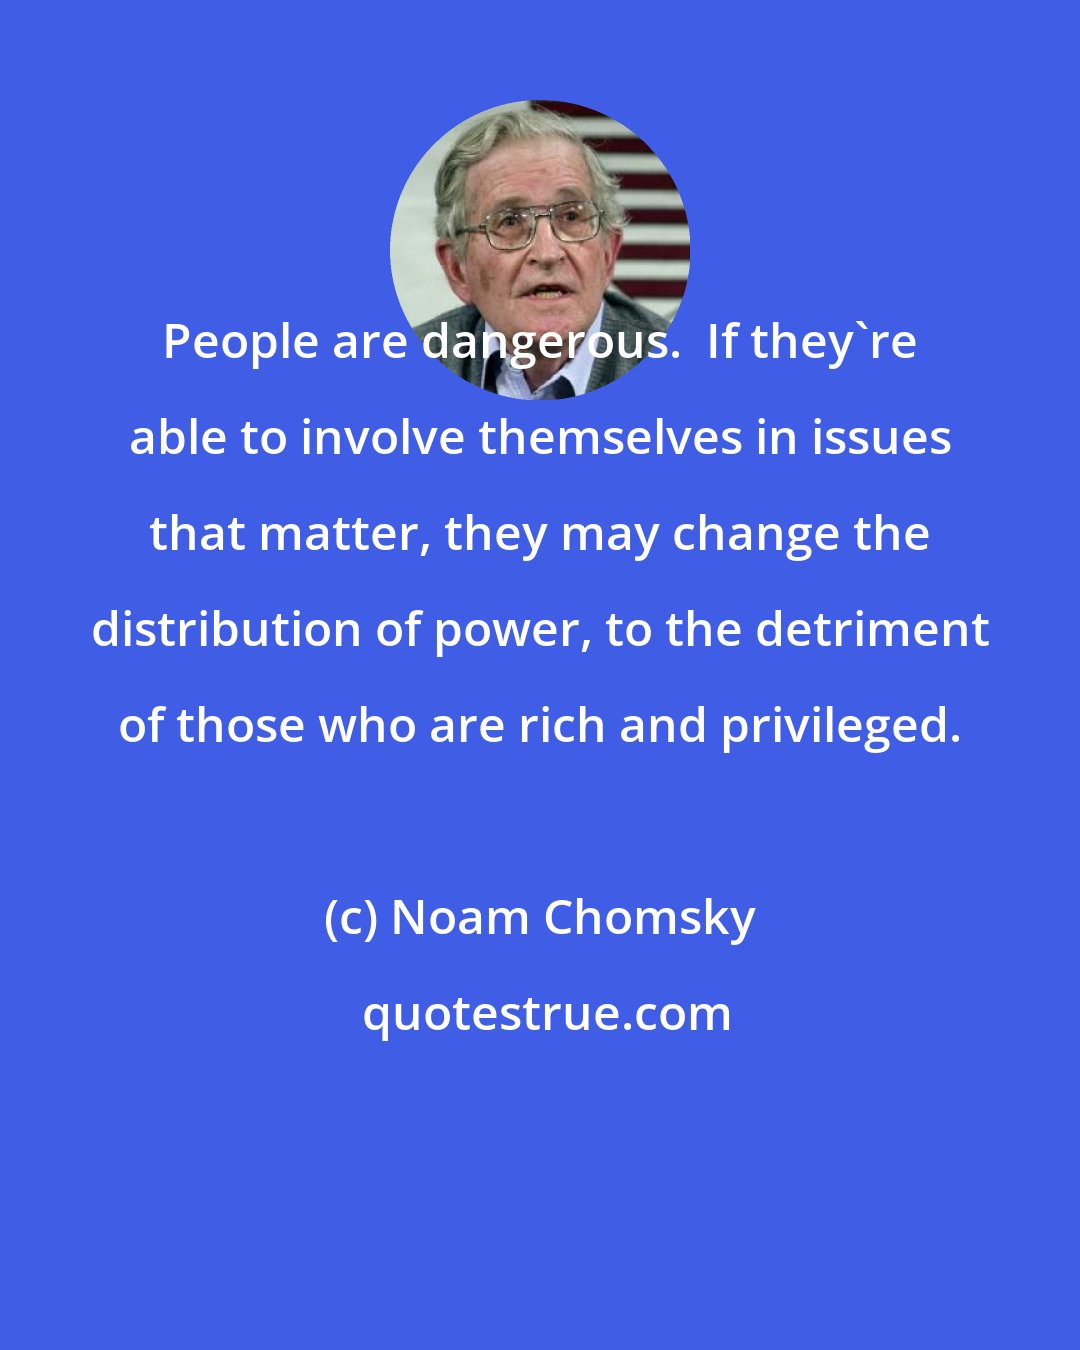 Noam Chomsky: People are dangerous.  If they're able to involve themselves in issues that matter, they may change the distribution of power, to the detriment of those who are rich and privileged.